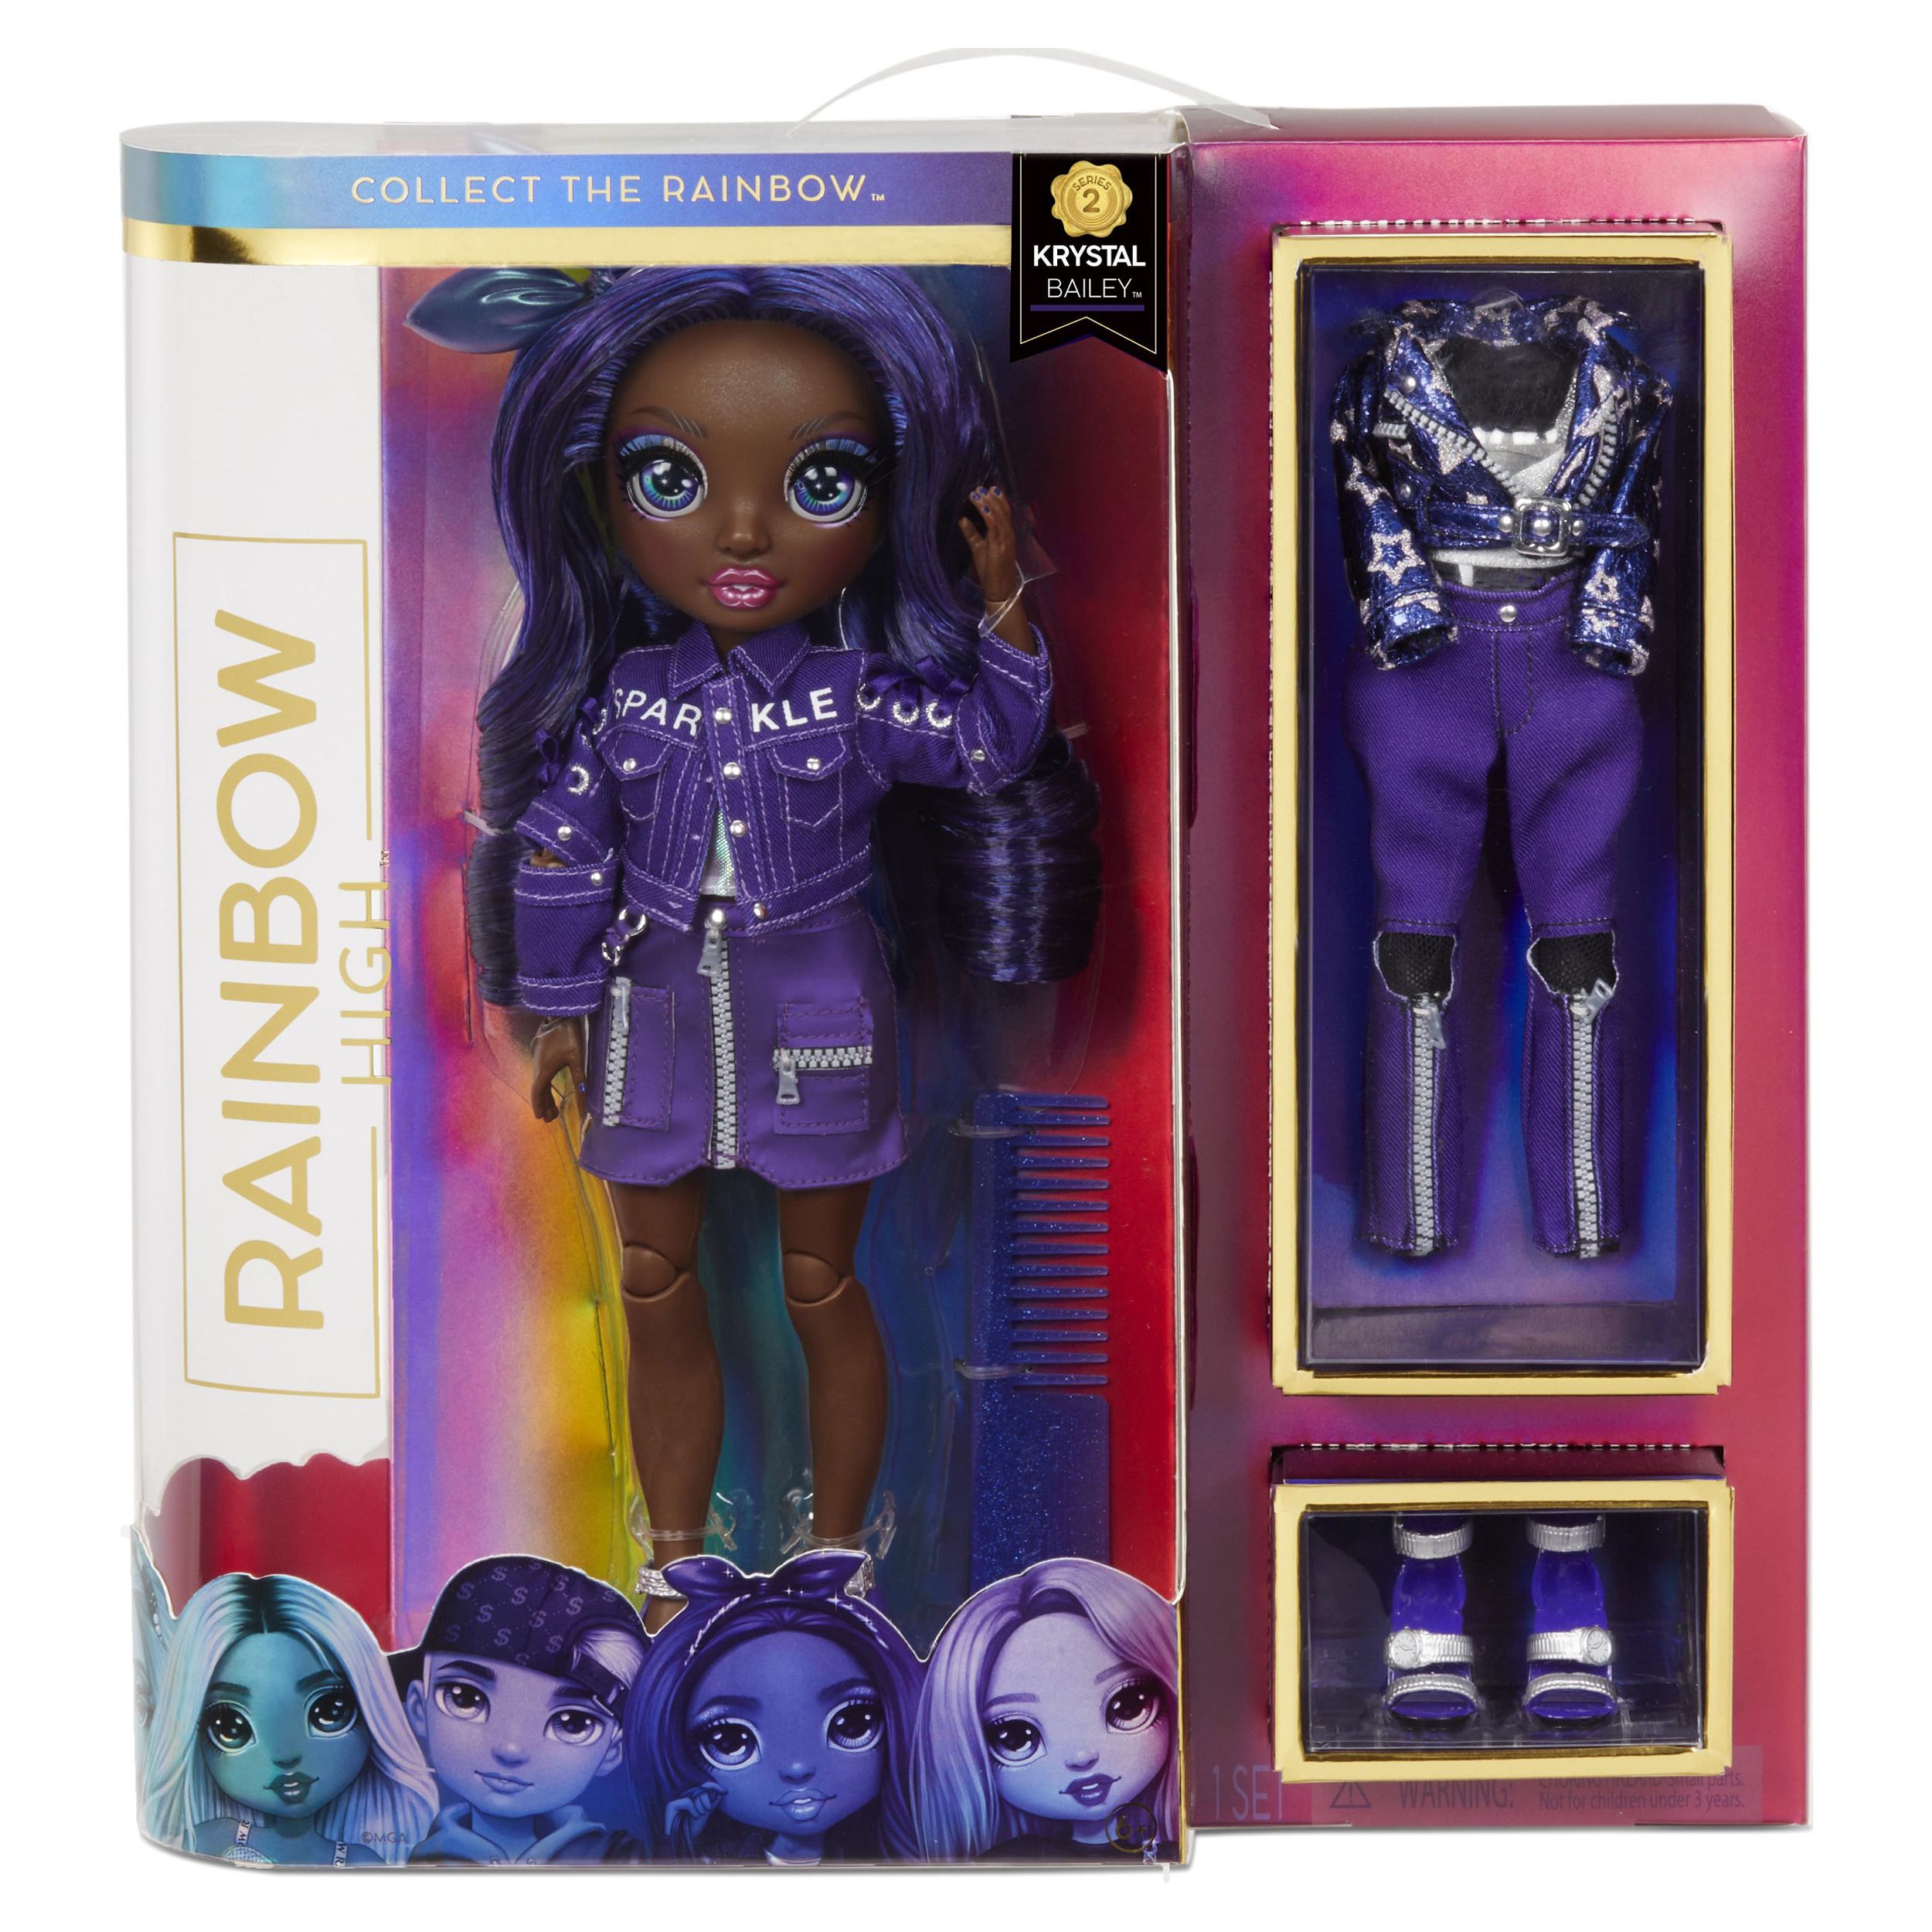 Rainbow High Krystal Bailey – Indigo (Dark Blue Purple) Fashion Doll With 2 Complete Mix & Match Outfits And Accessories, Toys for Kids 6-12 Years Old - image 3 of 8